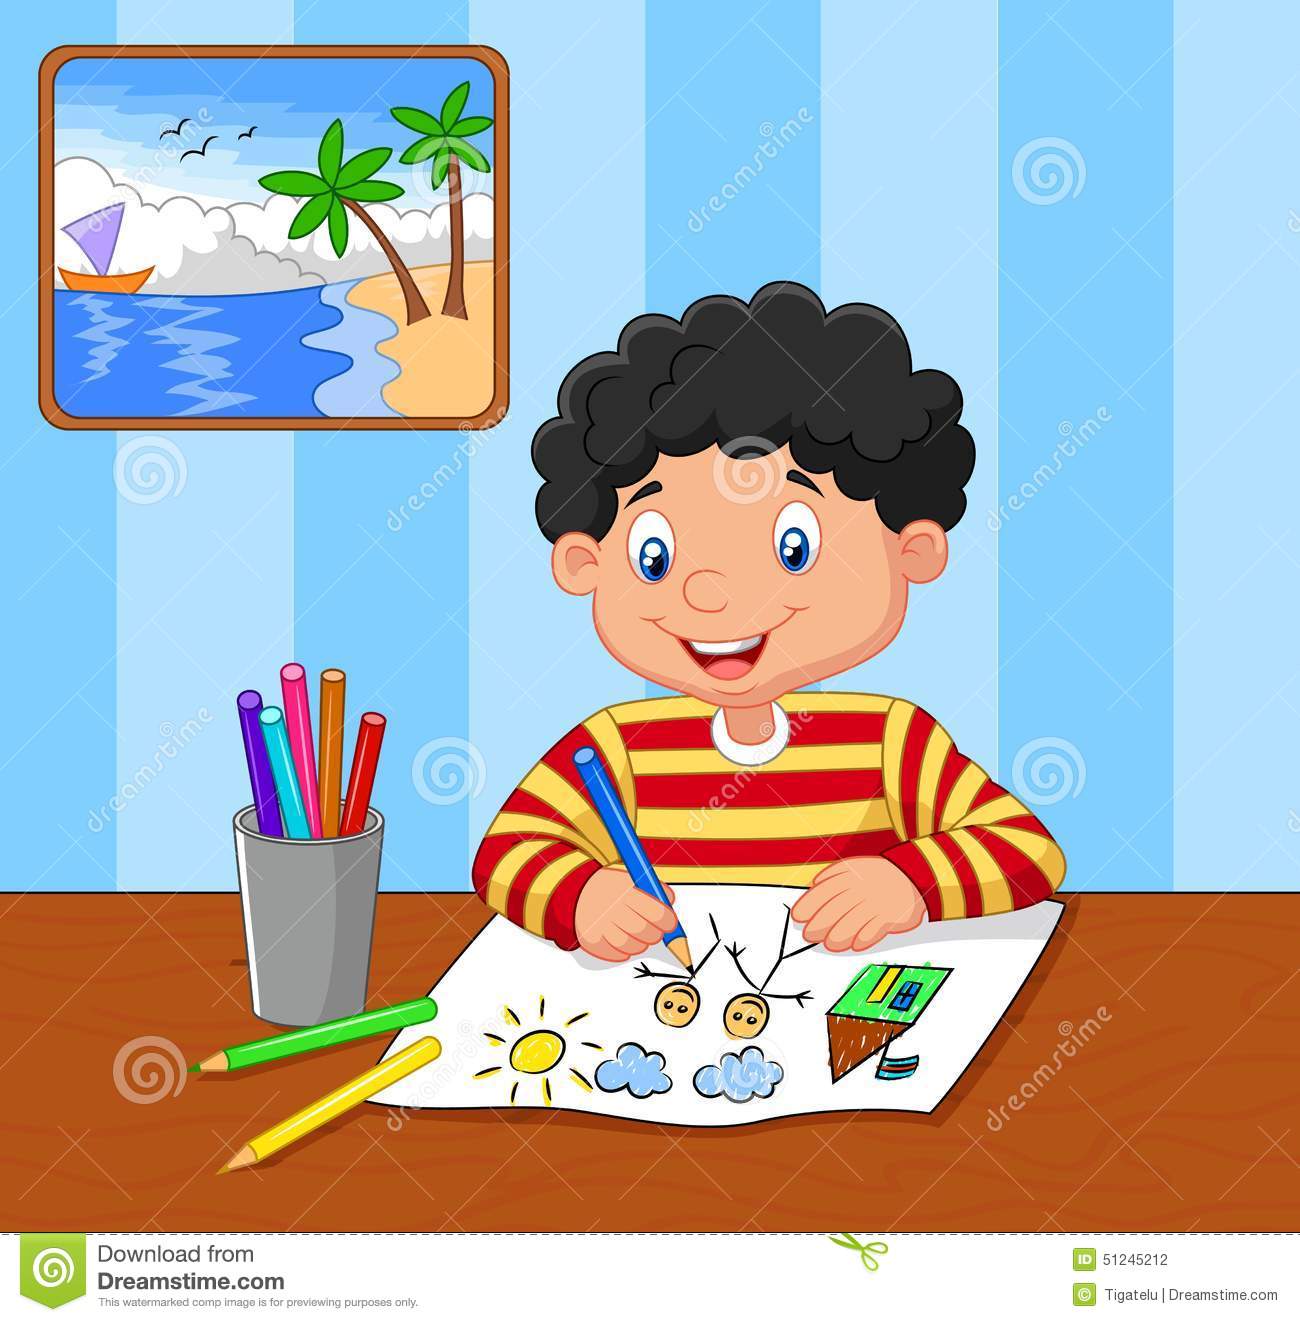 Clipart child drawing.